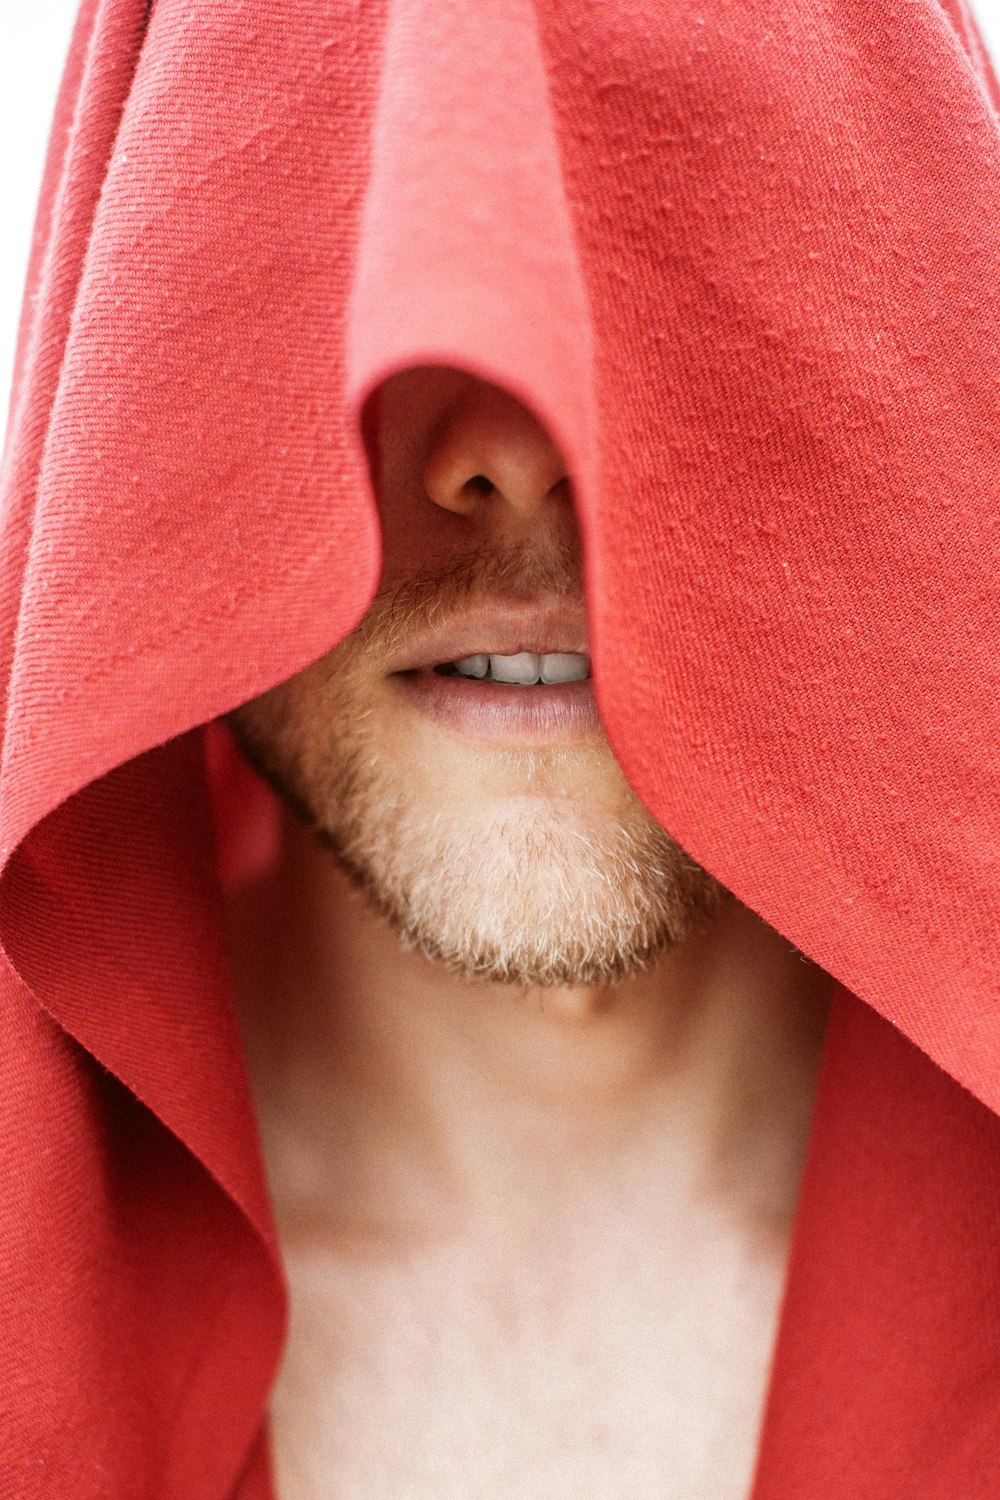 a man wearing a red towel over his face